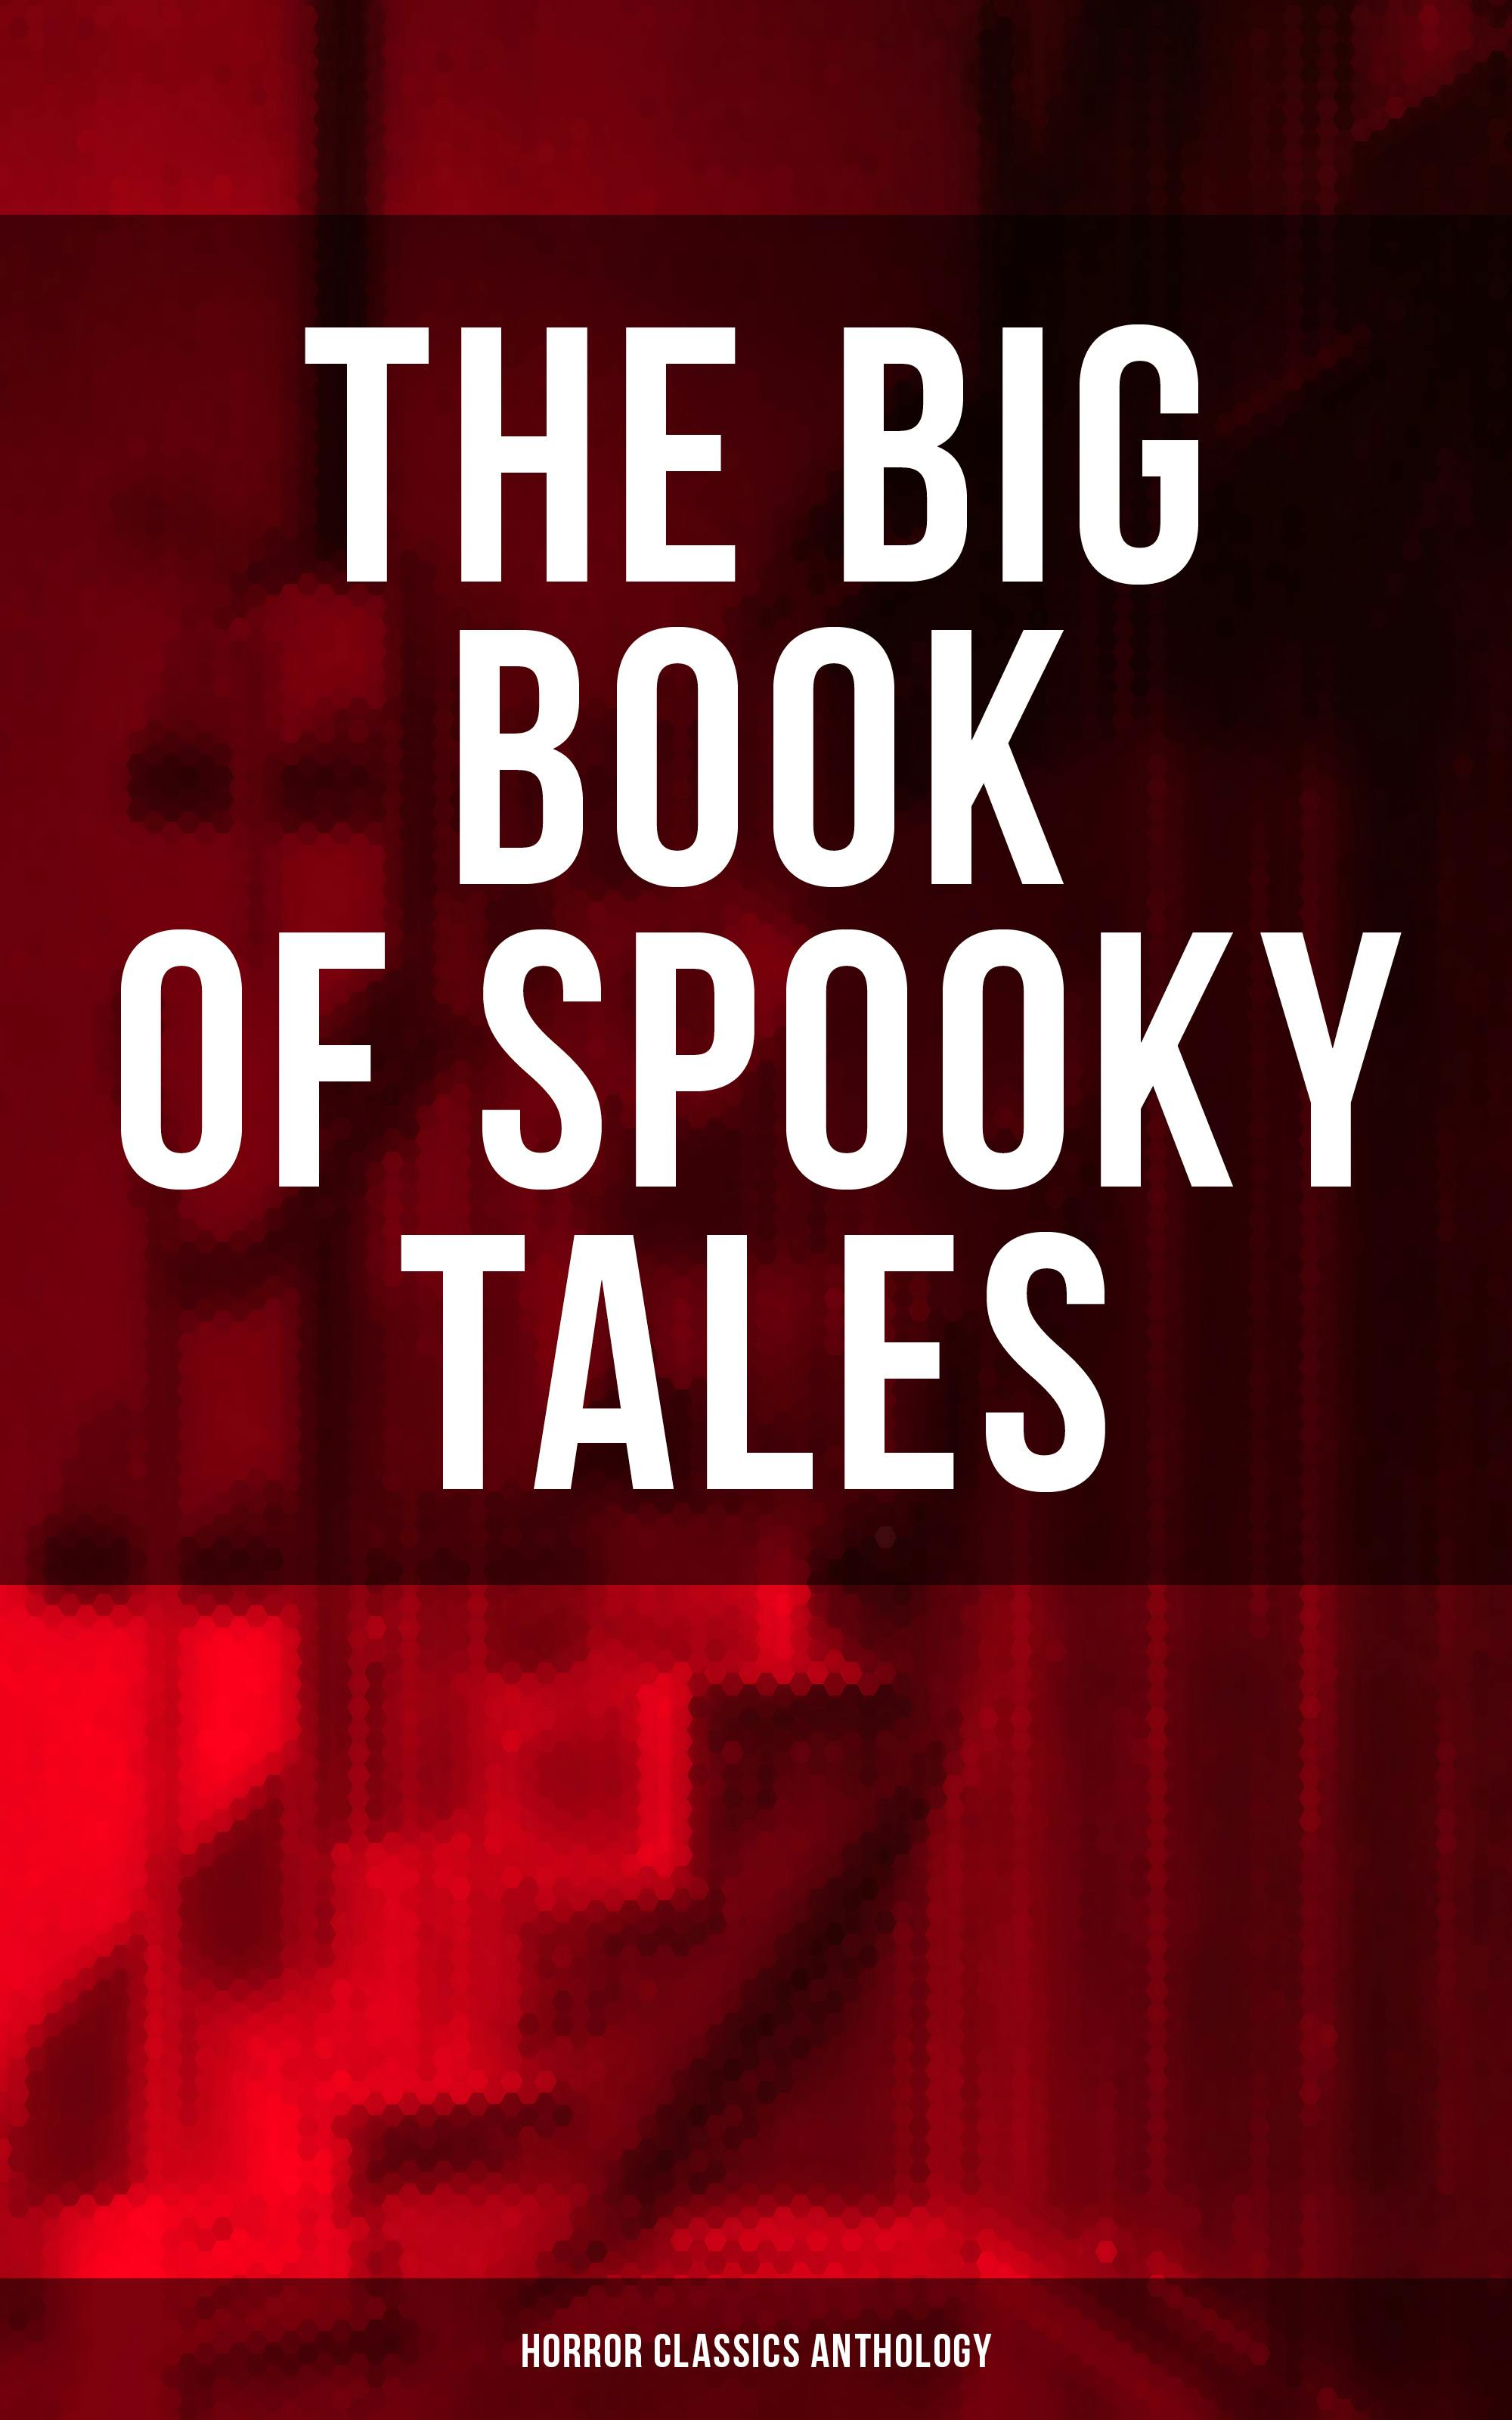 The Big Book of Spooky Tales - Horror Classics Anthology: Number 13, The Deserted House, The Man with the Pale Eyes, The Oblong Box, The Birth-Mark - Joseph L. French, W. F. Harvey, Nathaniel Hawthorne, F. Marryat, Pliny the Younger, Lafcadio Hearn, C. Moffett, R. L. Stevenson, Théopile Gautier, Wilkie Collins, Guy de Maupassant, Villiers Adam, Fitz-James O'Brien, Edgar Allan Poe, M. R. James, Katherine Rickford, Brander Matthews, Margaret Oliphant, William Archer, C. B. Fernando